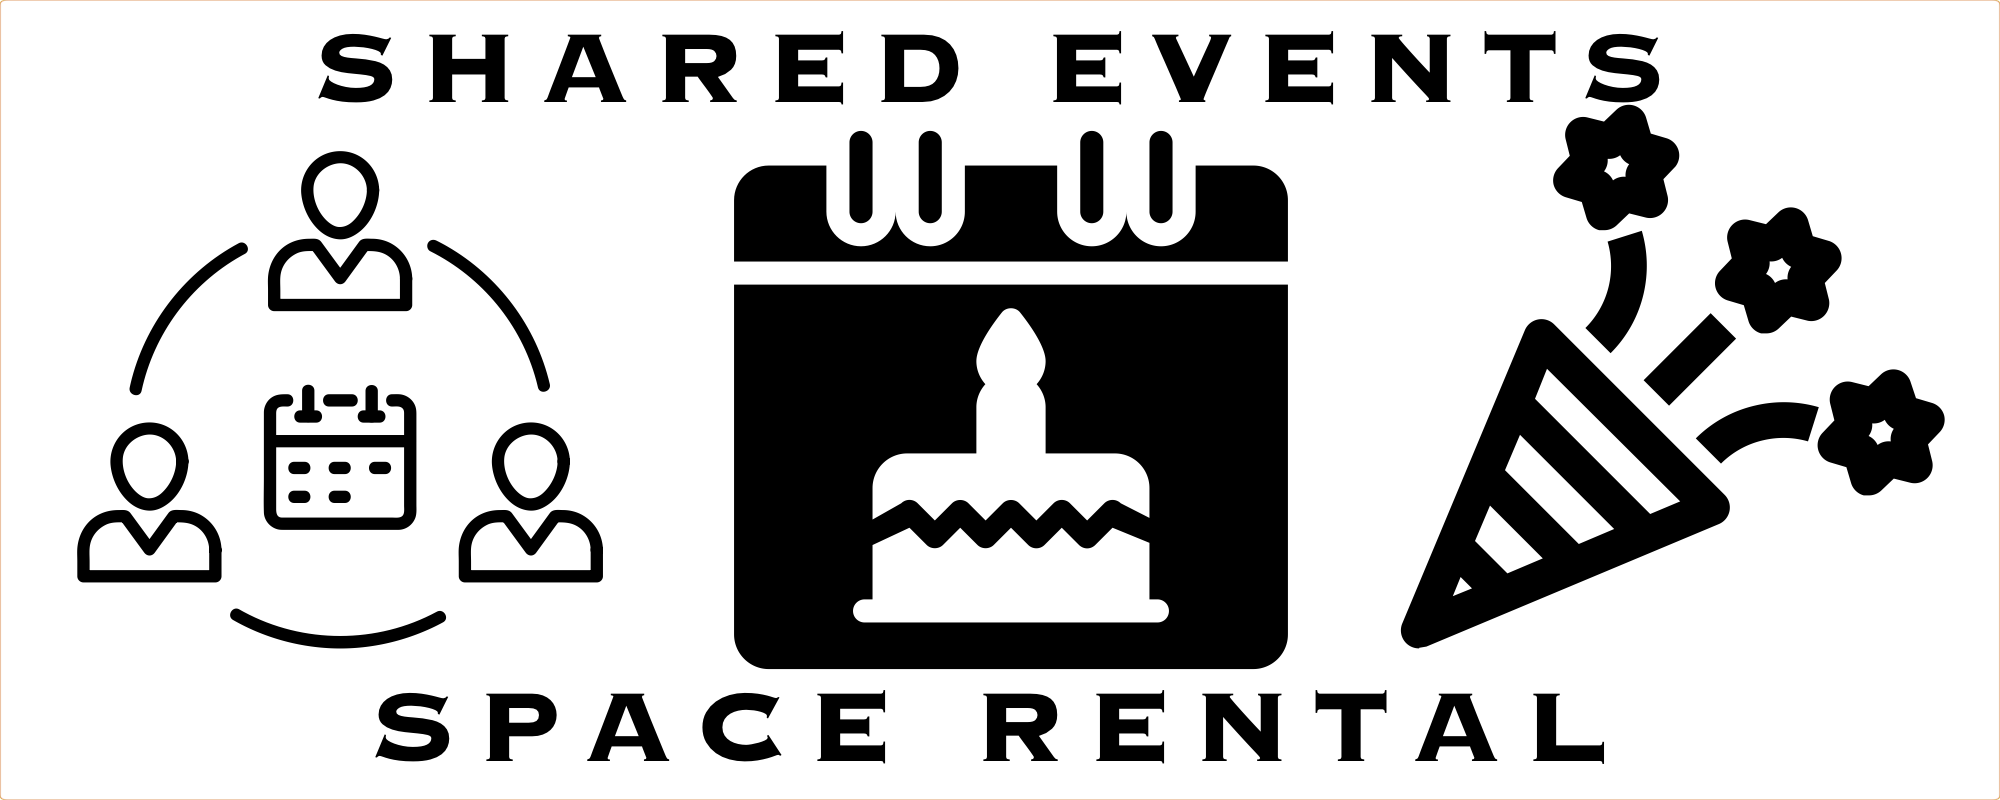 SHARED EVENTS SPACE RENTAL